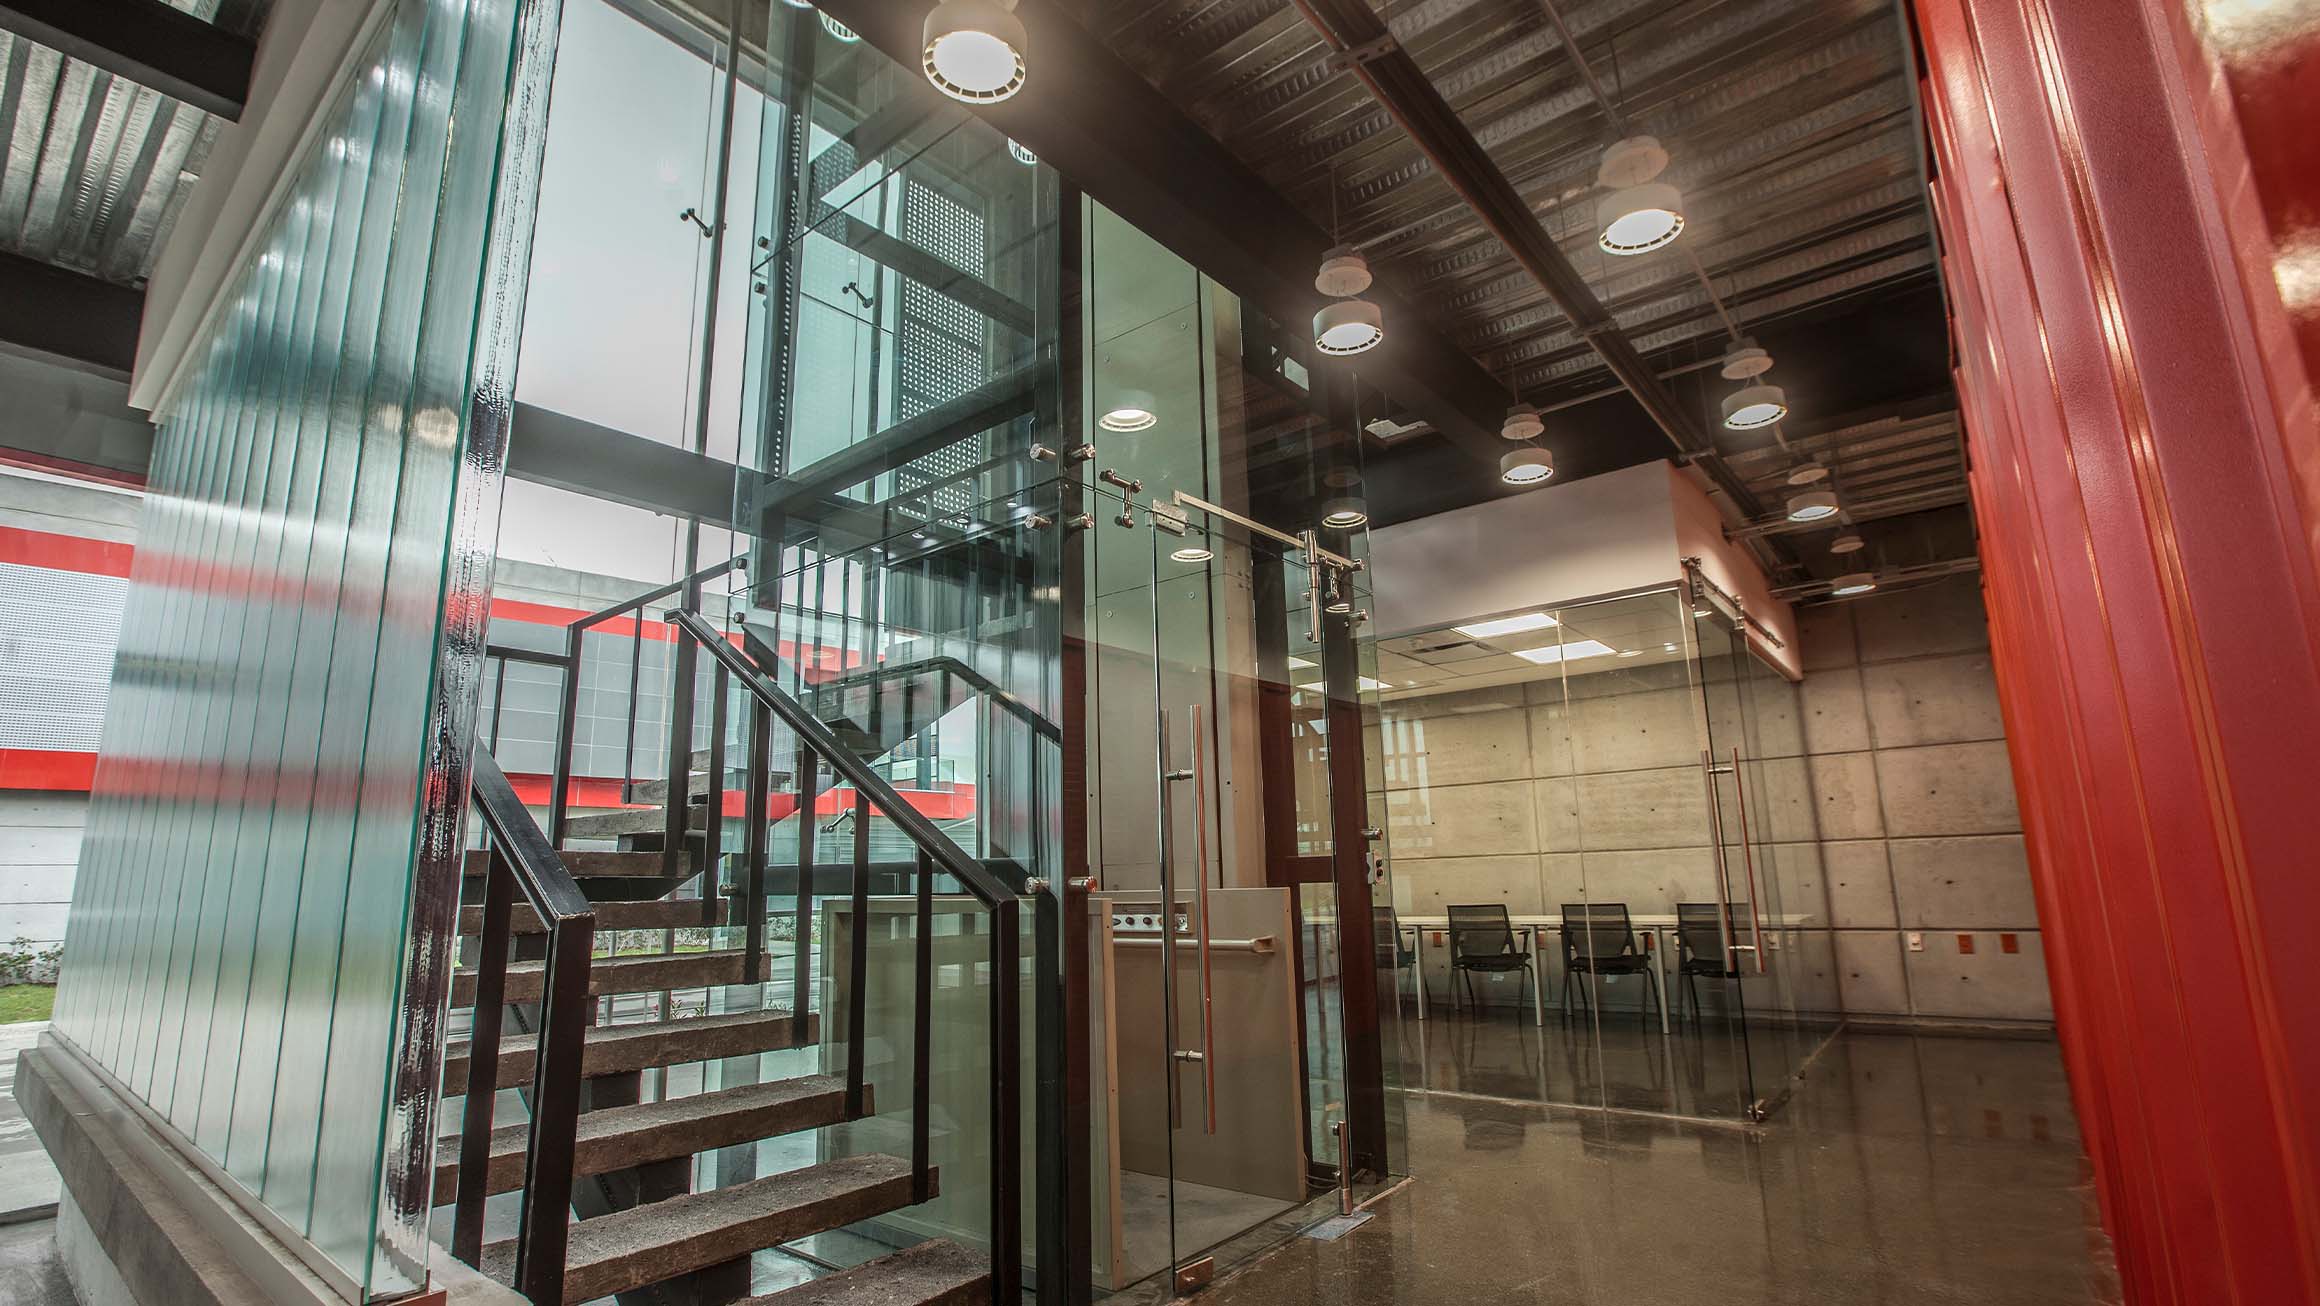 Interior photograph of a custom made office buiding with glass walls, showing stairs and en elevator